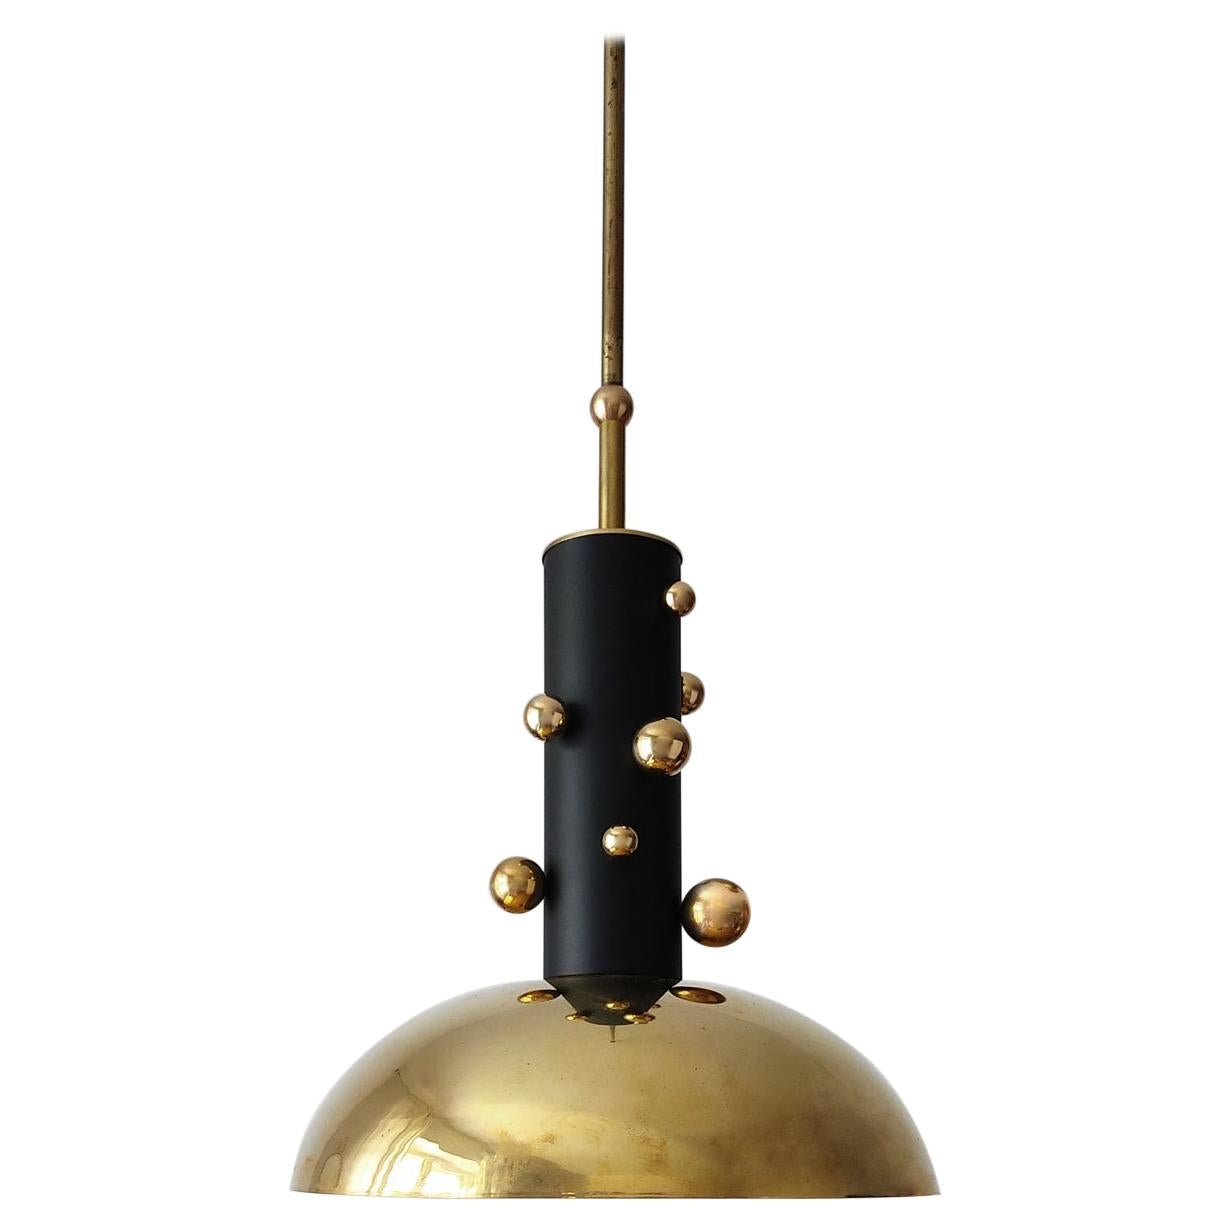 One of ... Beautiful German Sculptural Bubble Brass Tube Ceiling Pendant Light For Sale